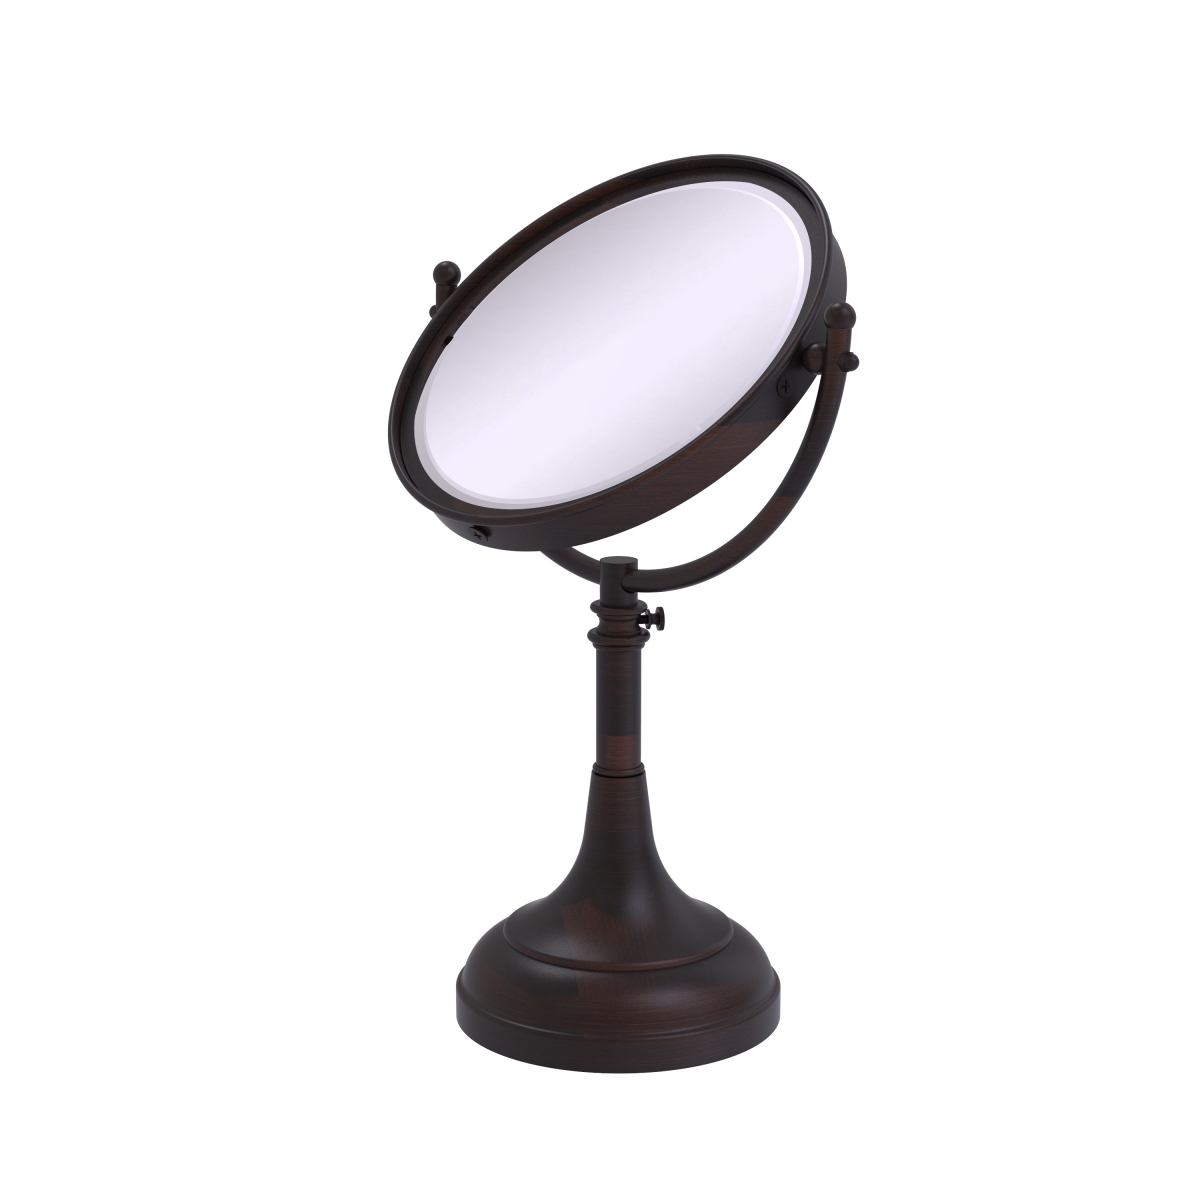 Picture of Allied Brass DM-1-3X-VB 8 in. Height Adjustable Vanity Top Make-Up Mirror 3X Magnification, Venetian Bronze